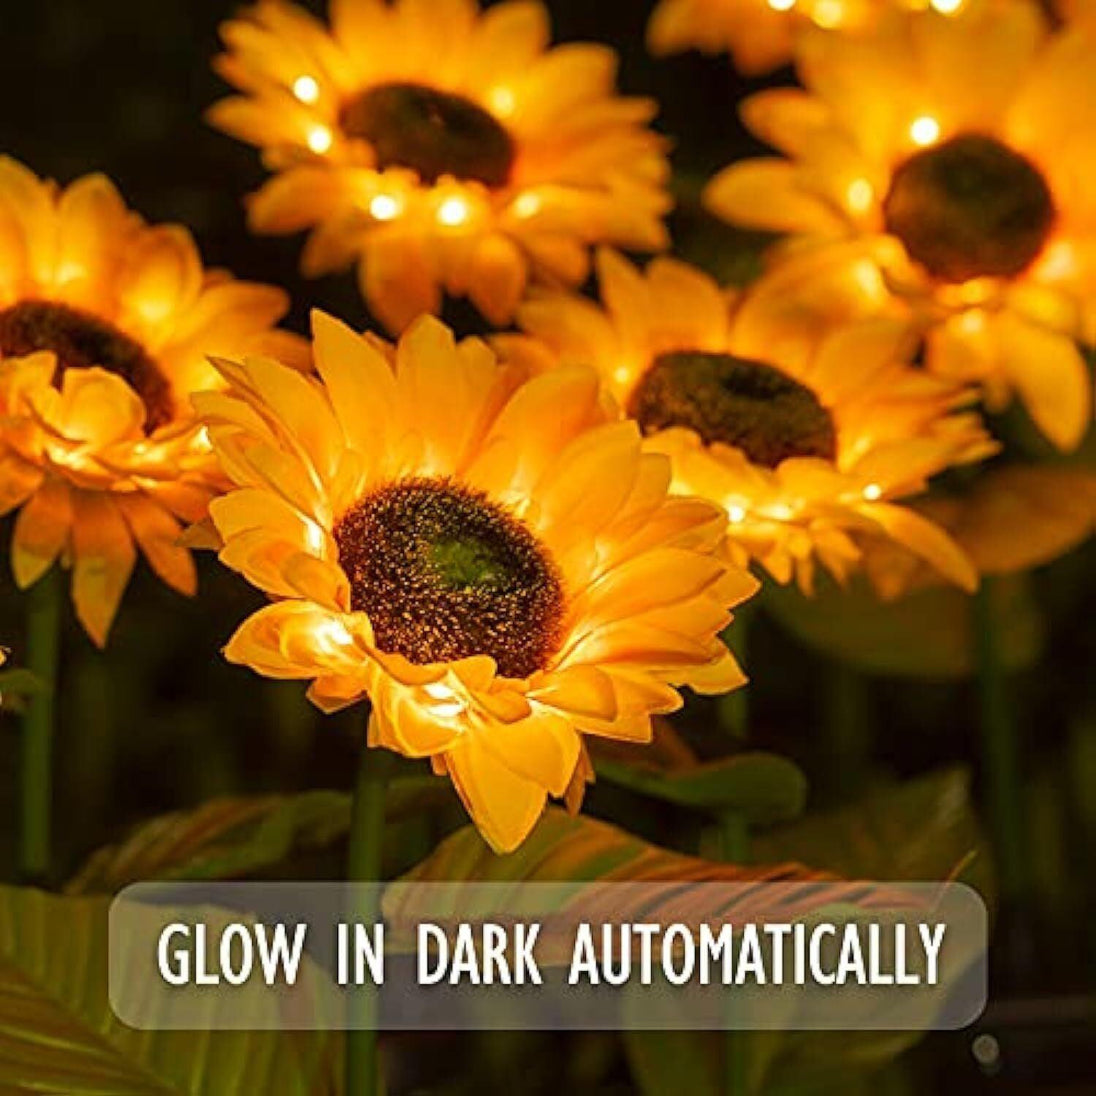 Buy LED Solar Sunflower Lights Flower Lamp Landscape Lawn Path Garden AU Day discounted | Products On Sale Australia